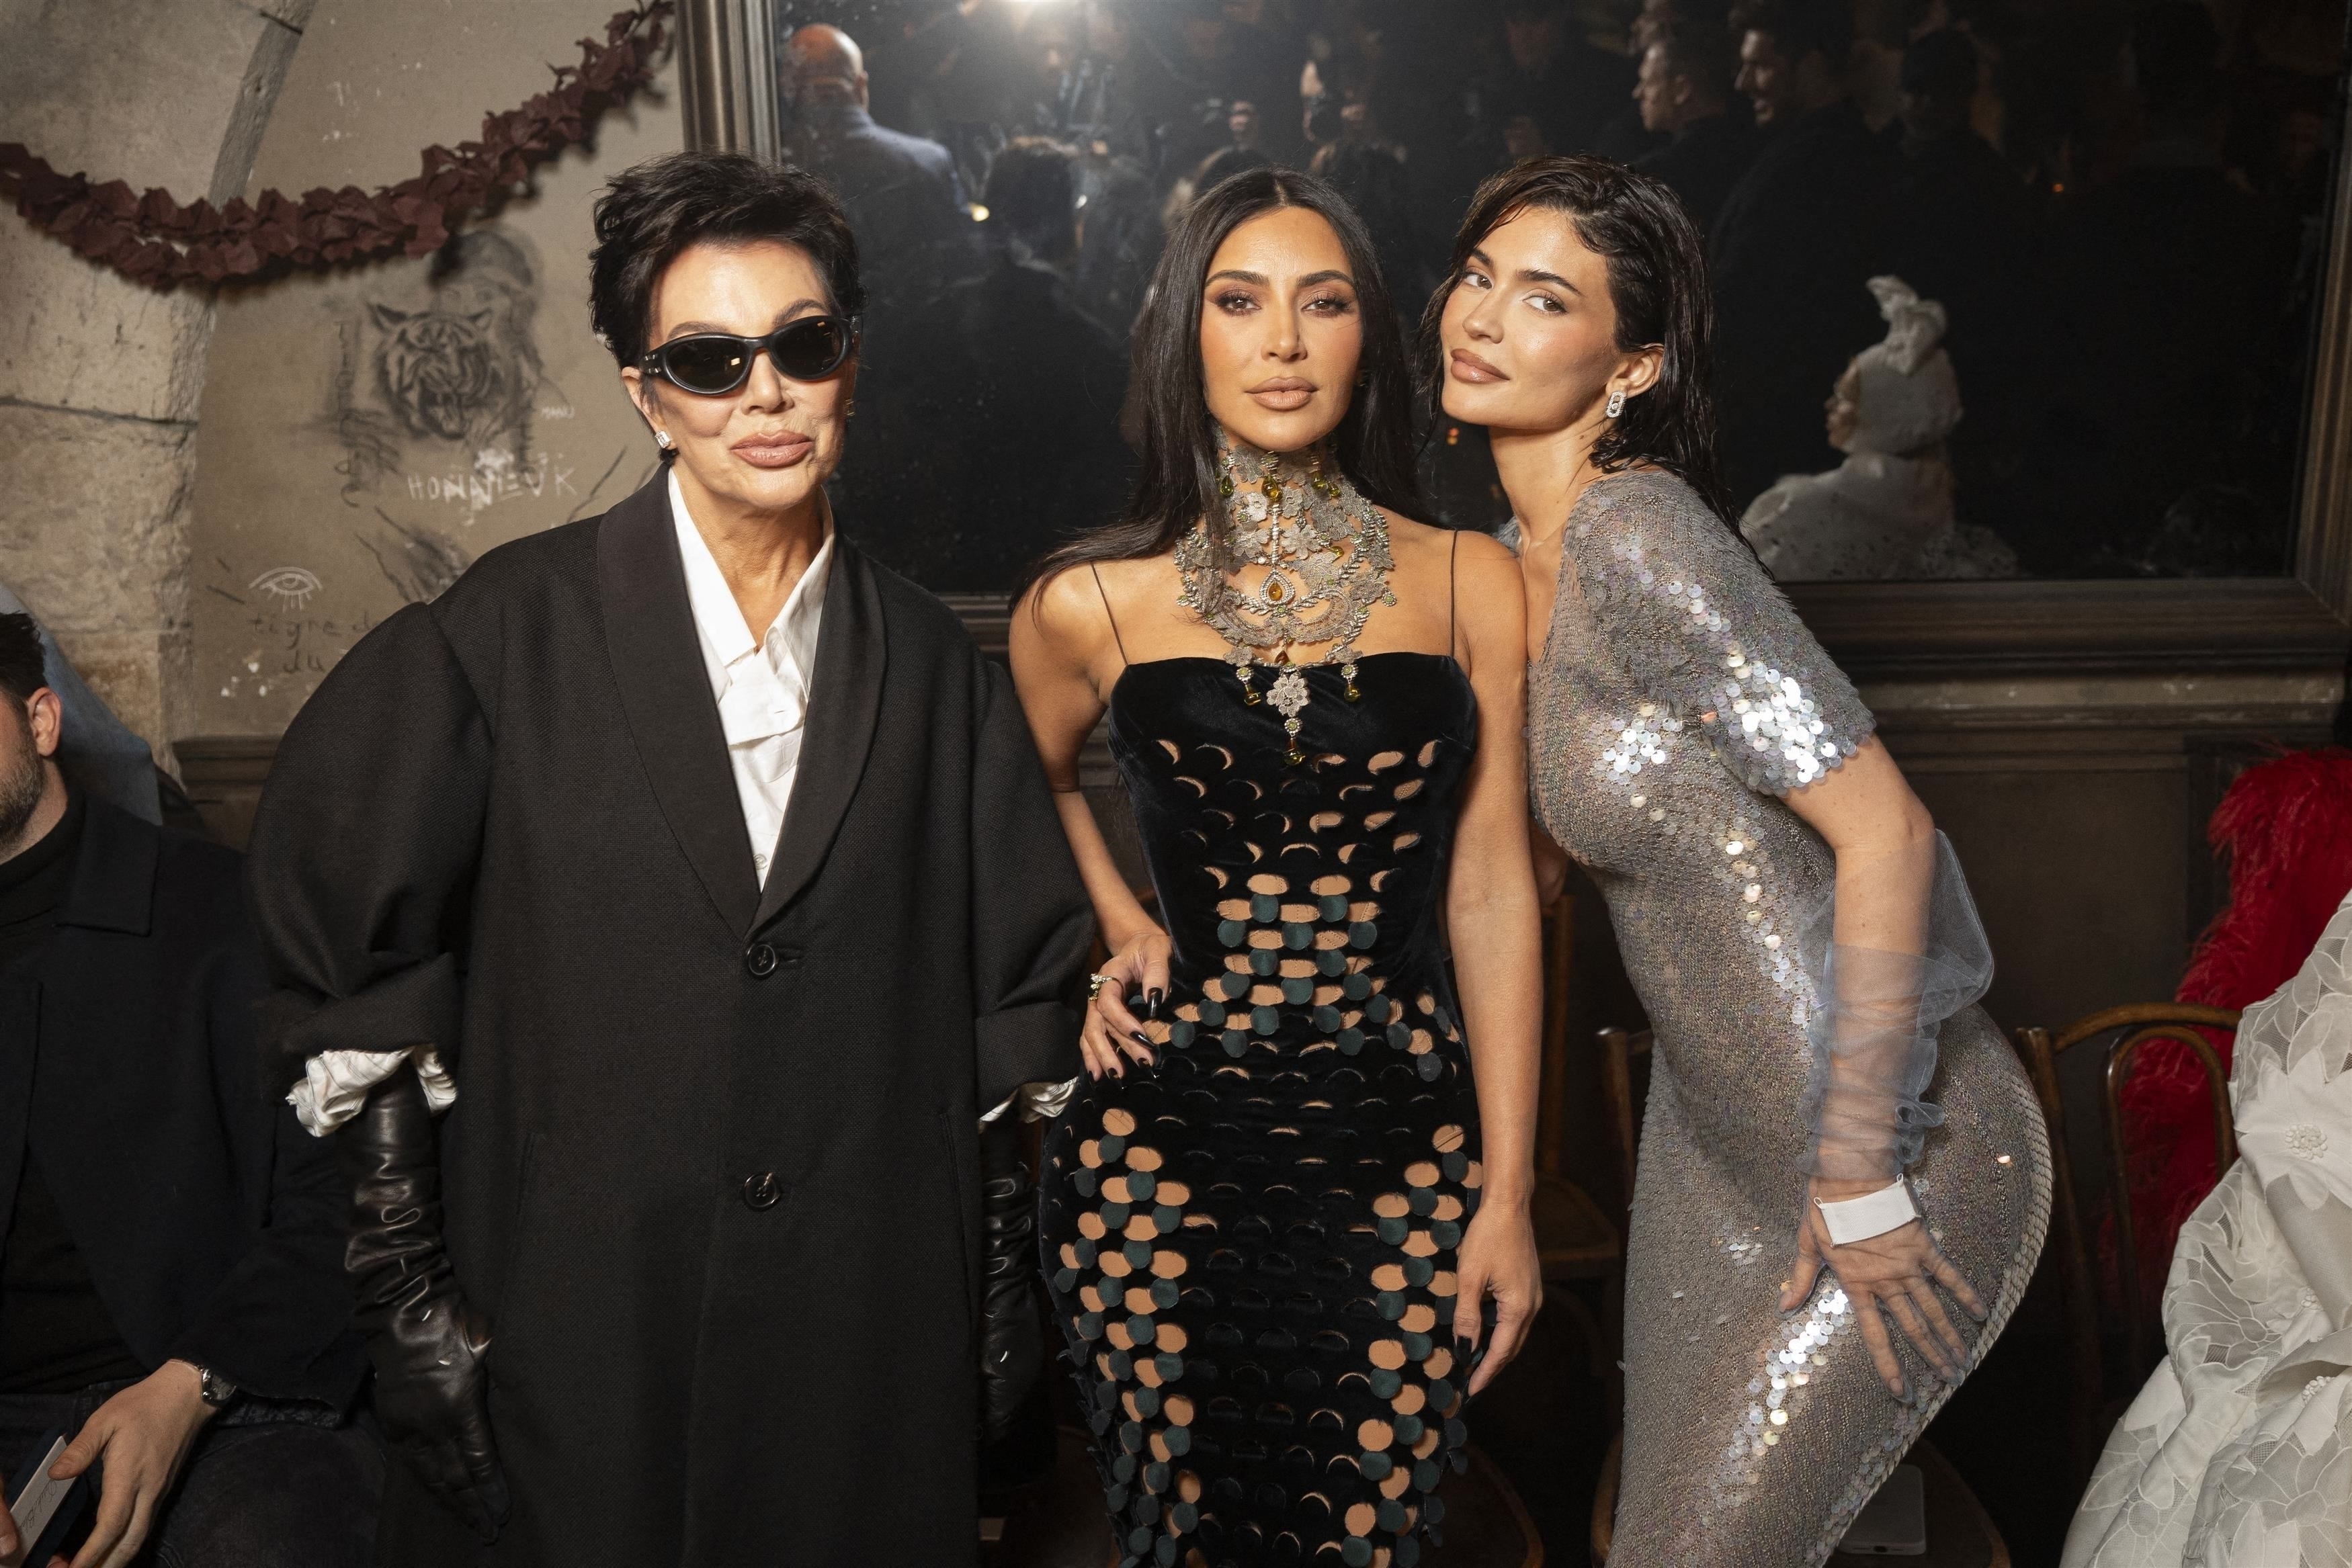 Kim posed with her mother Kris Jenner and sister Kylie Jenner